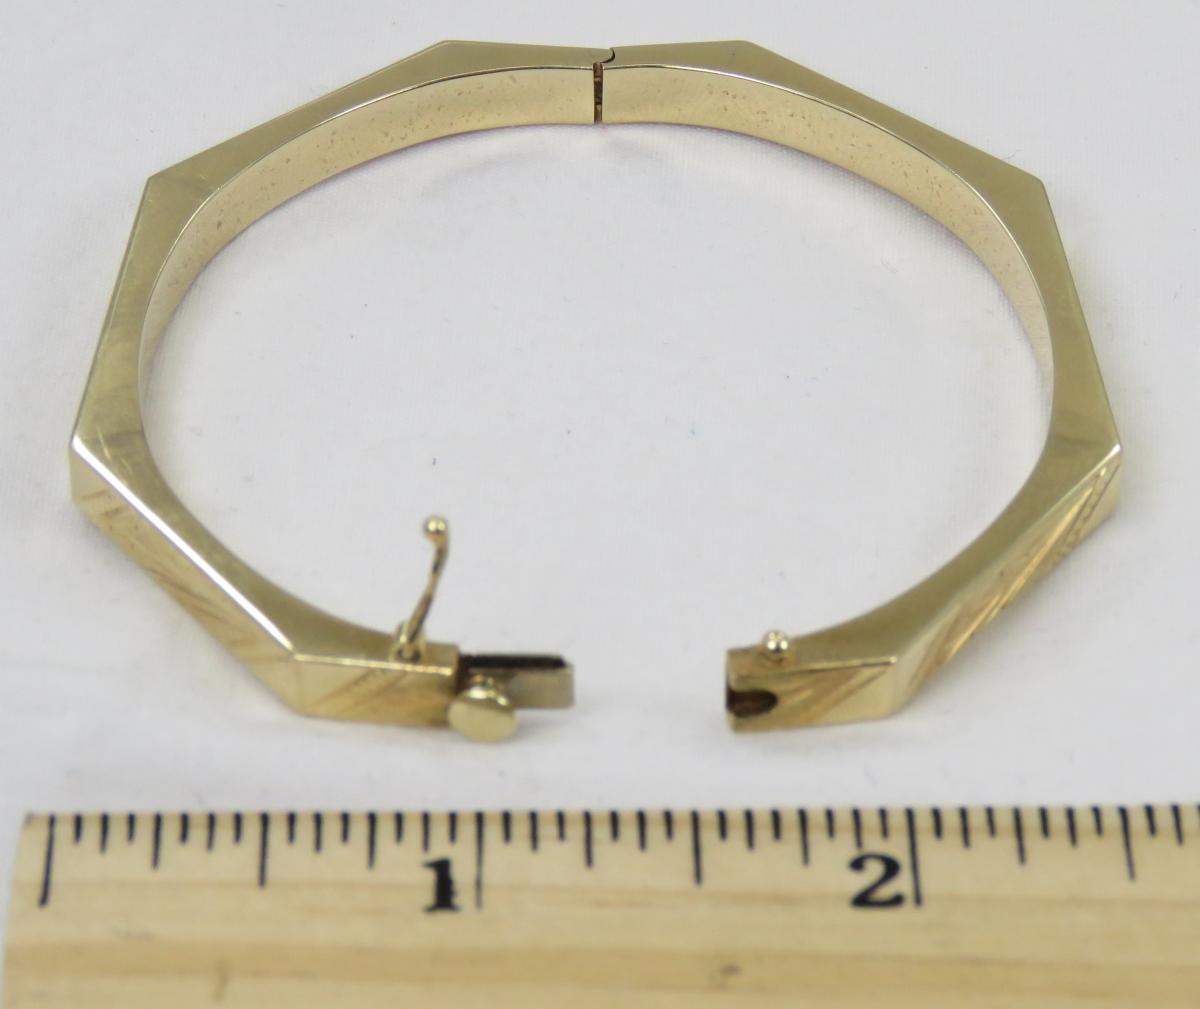 14kt Yellow Gold Etched Bracelet from Spain